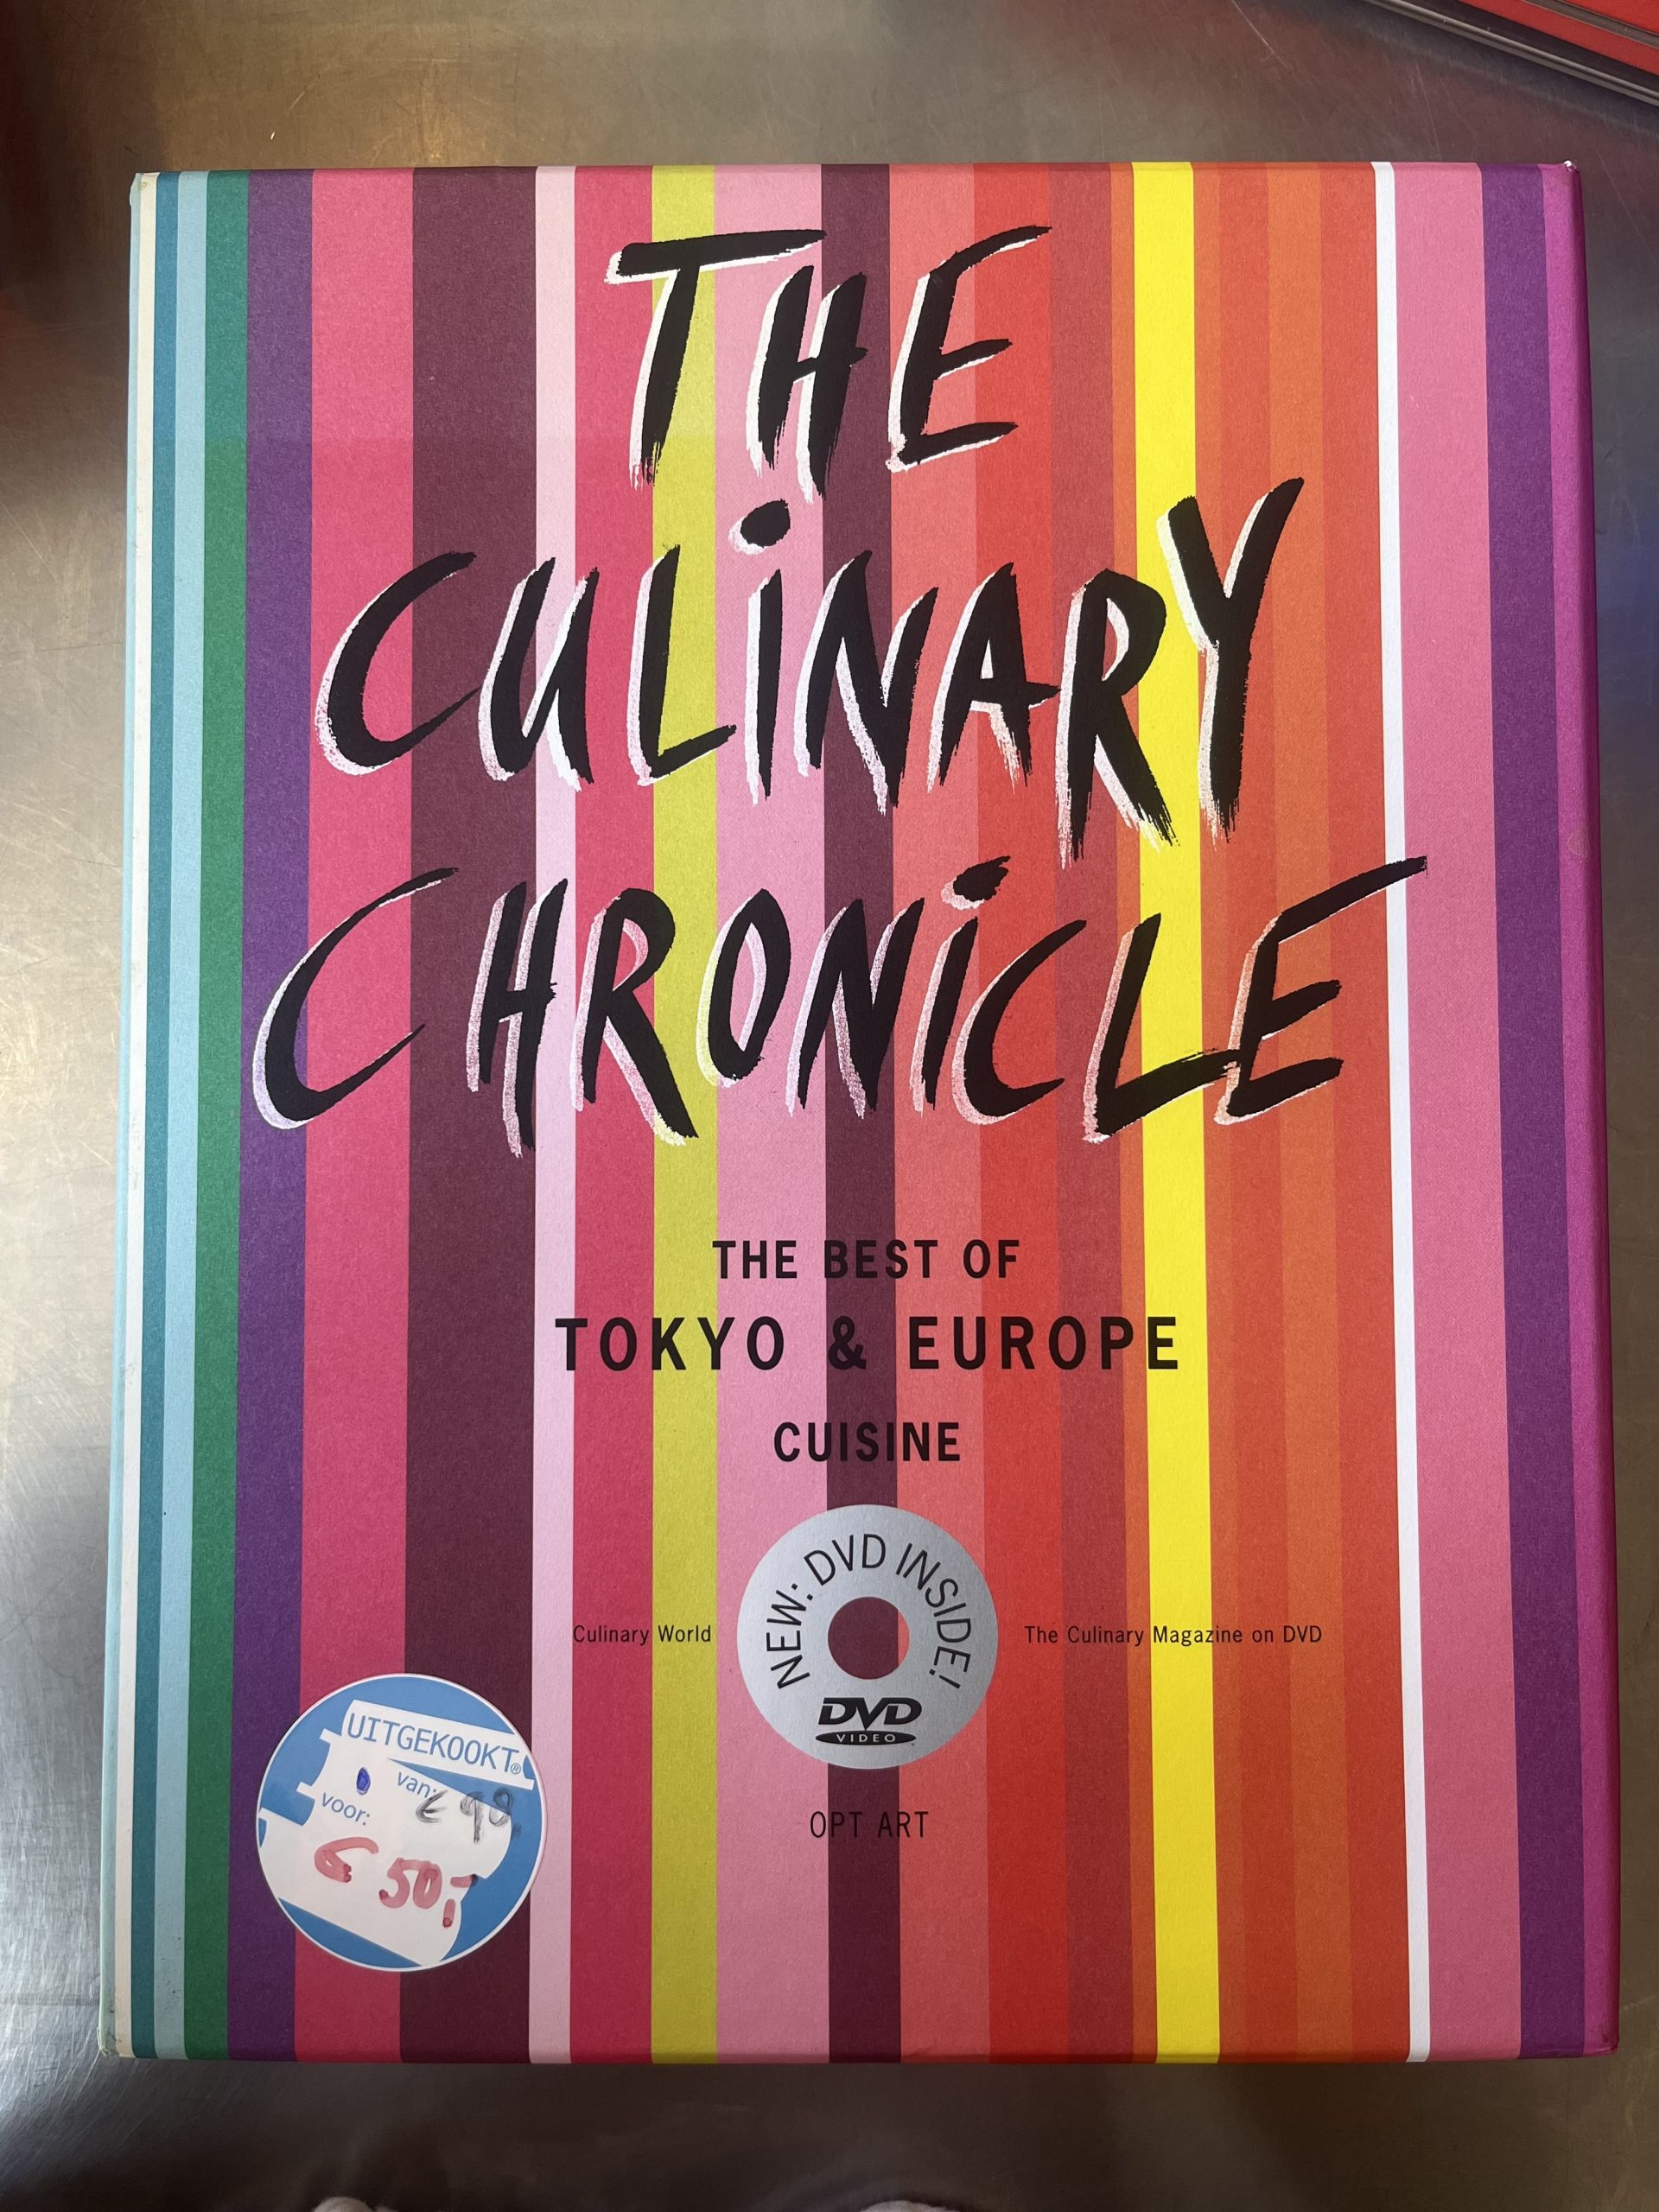 The Culinary Chronicle